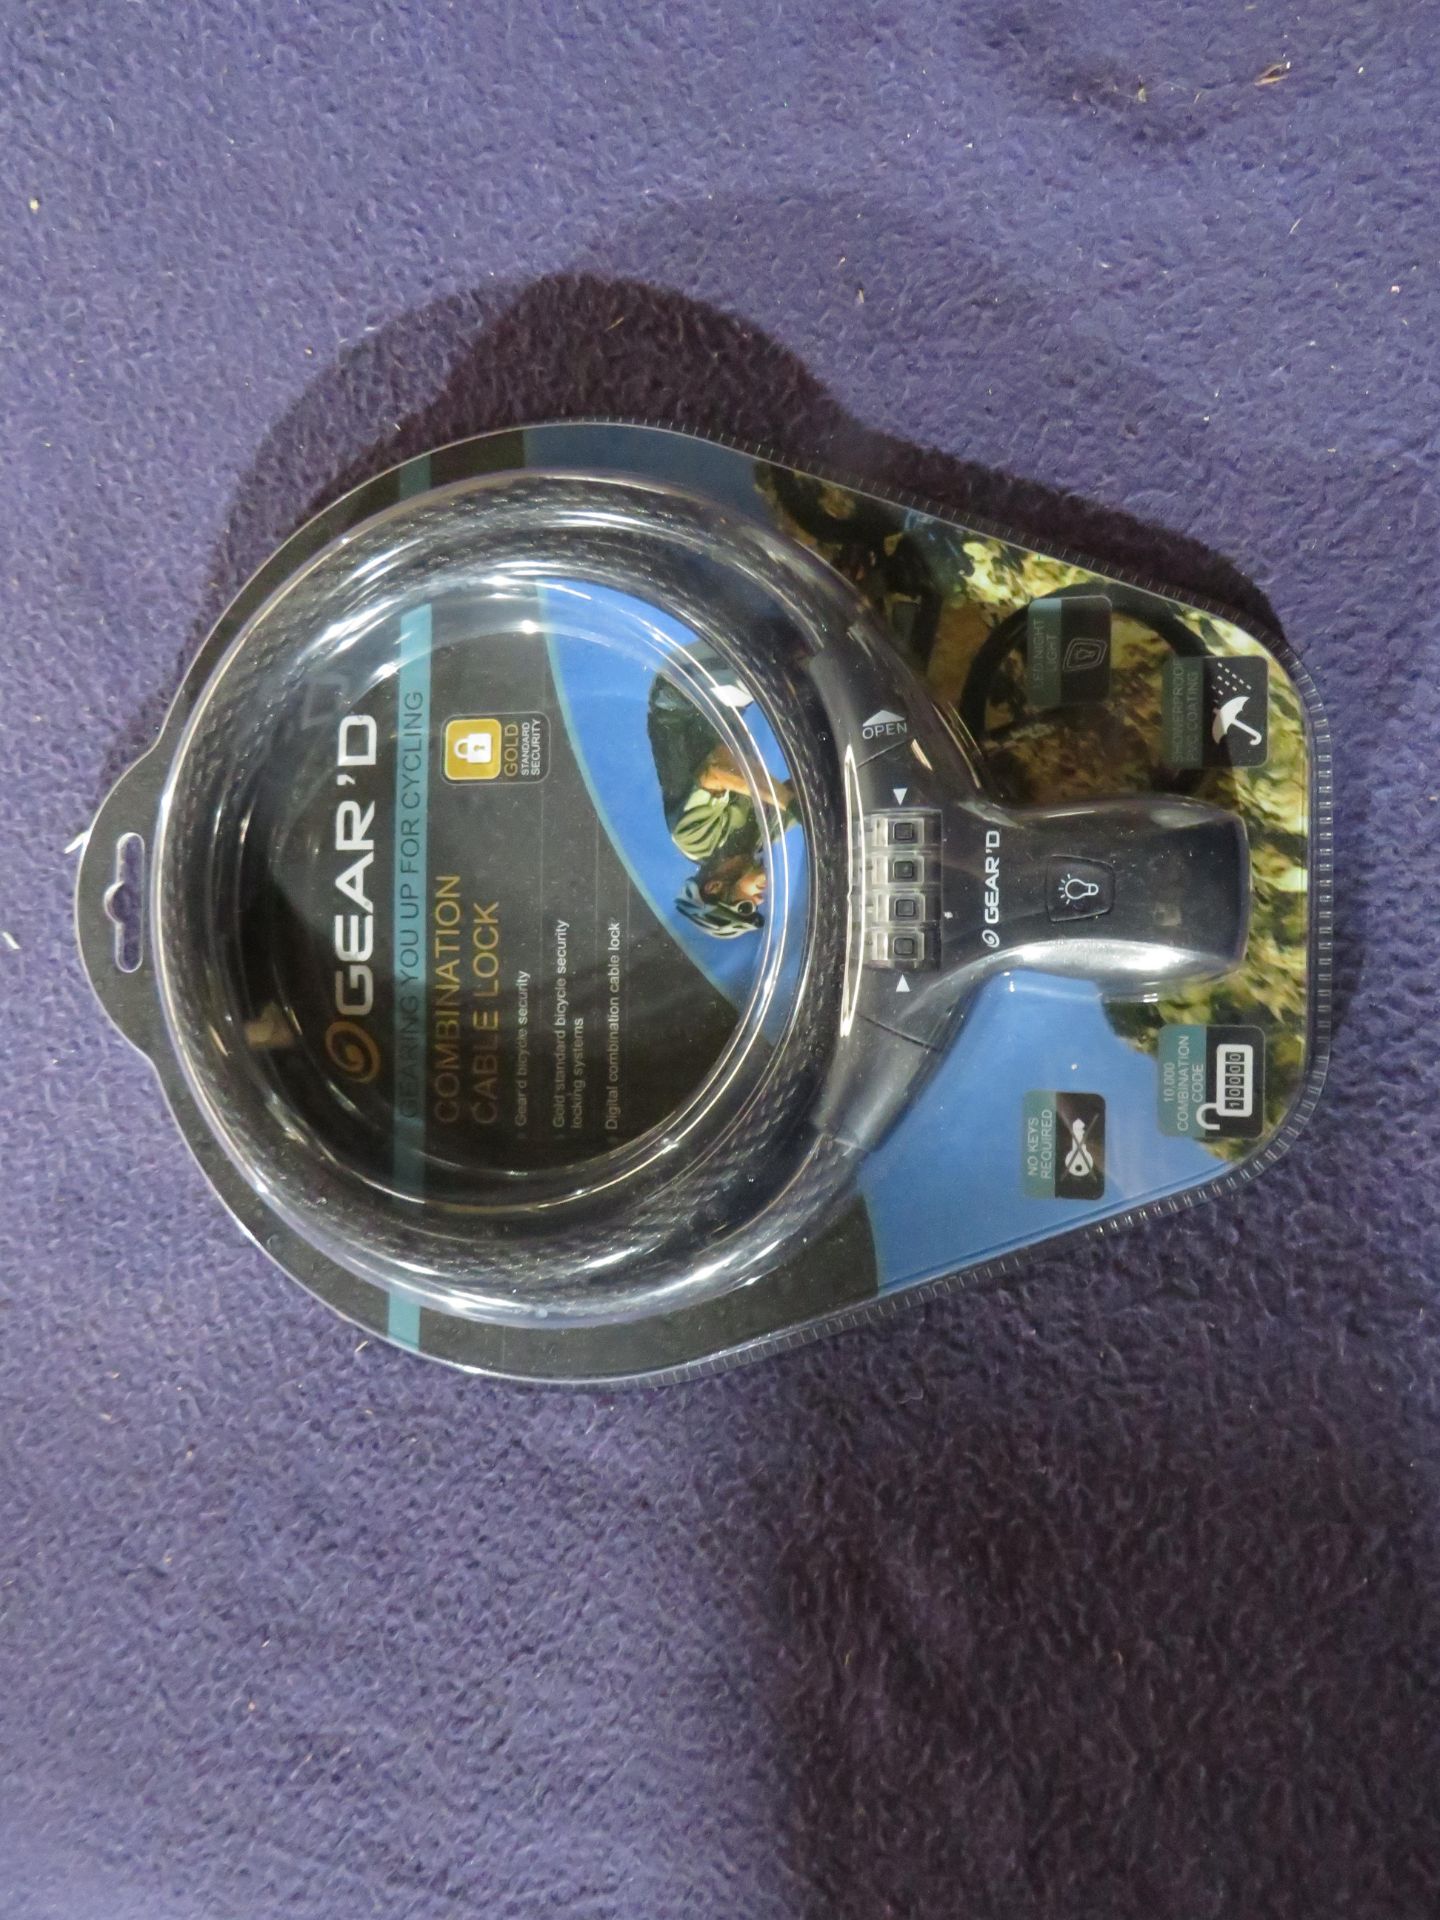 5x Gear'D - Combination Cable Lock for Bicycle - New & Packaged.